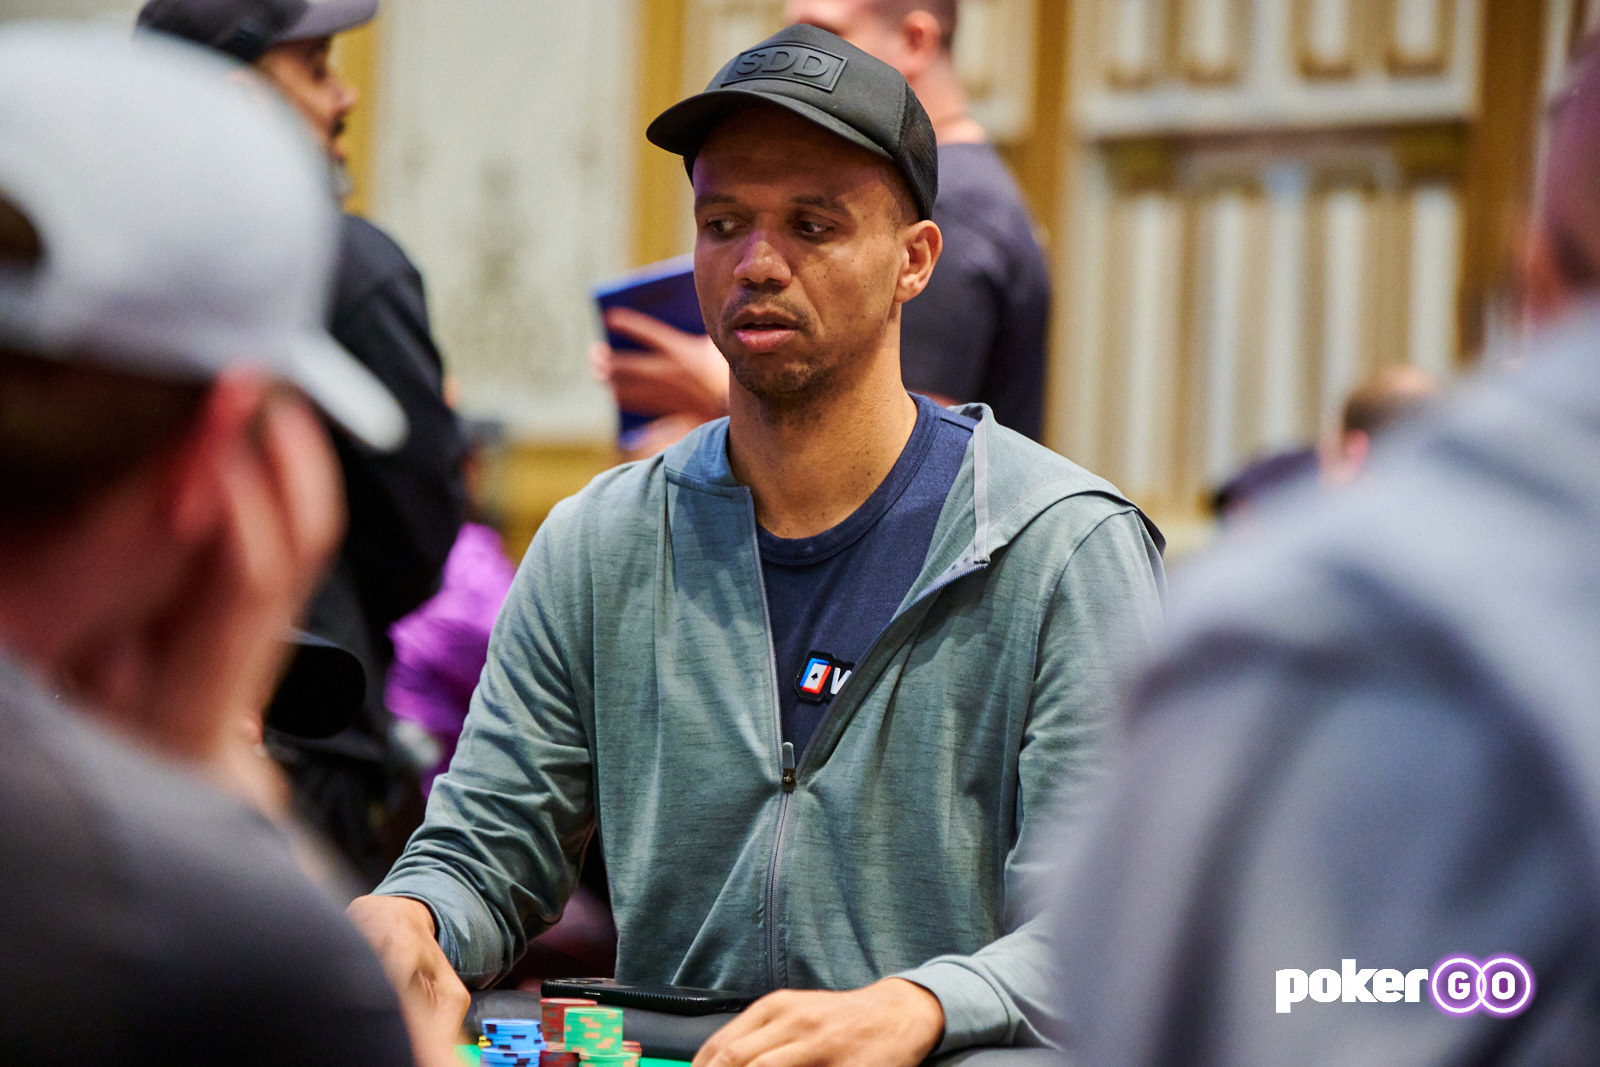 Phil Ivey eliminated from WSOP 2022 Main Event